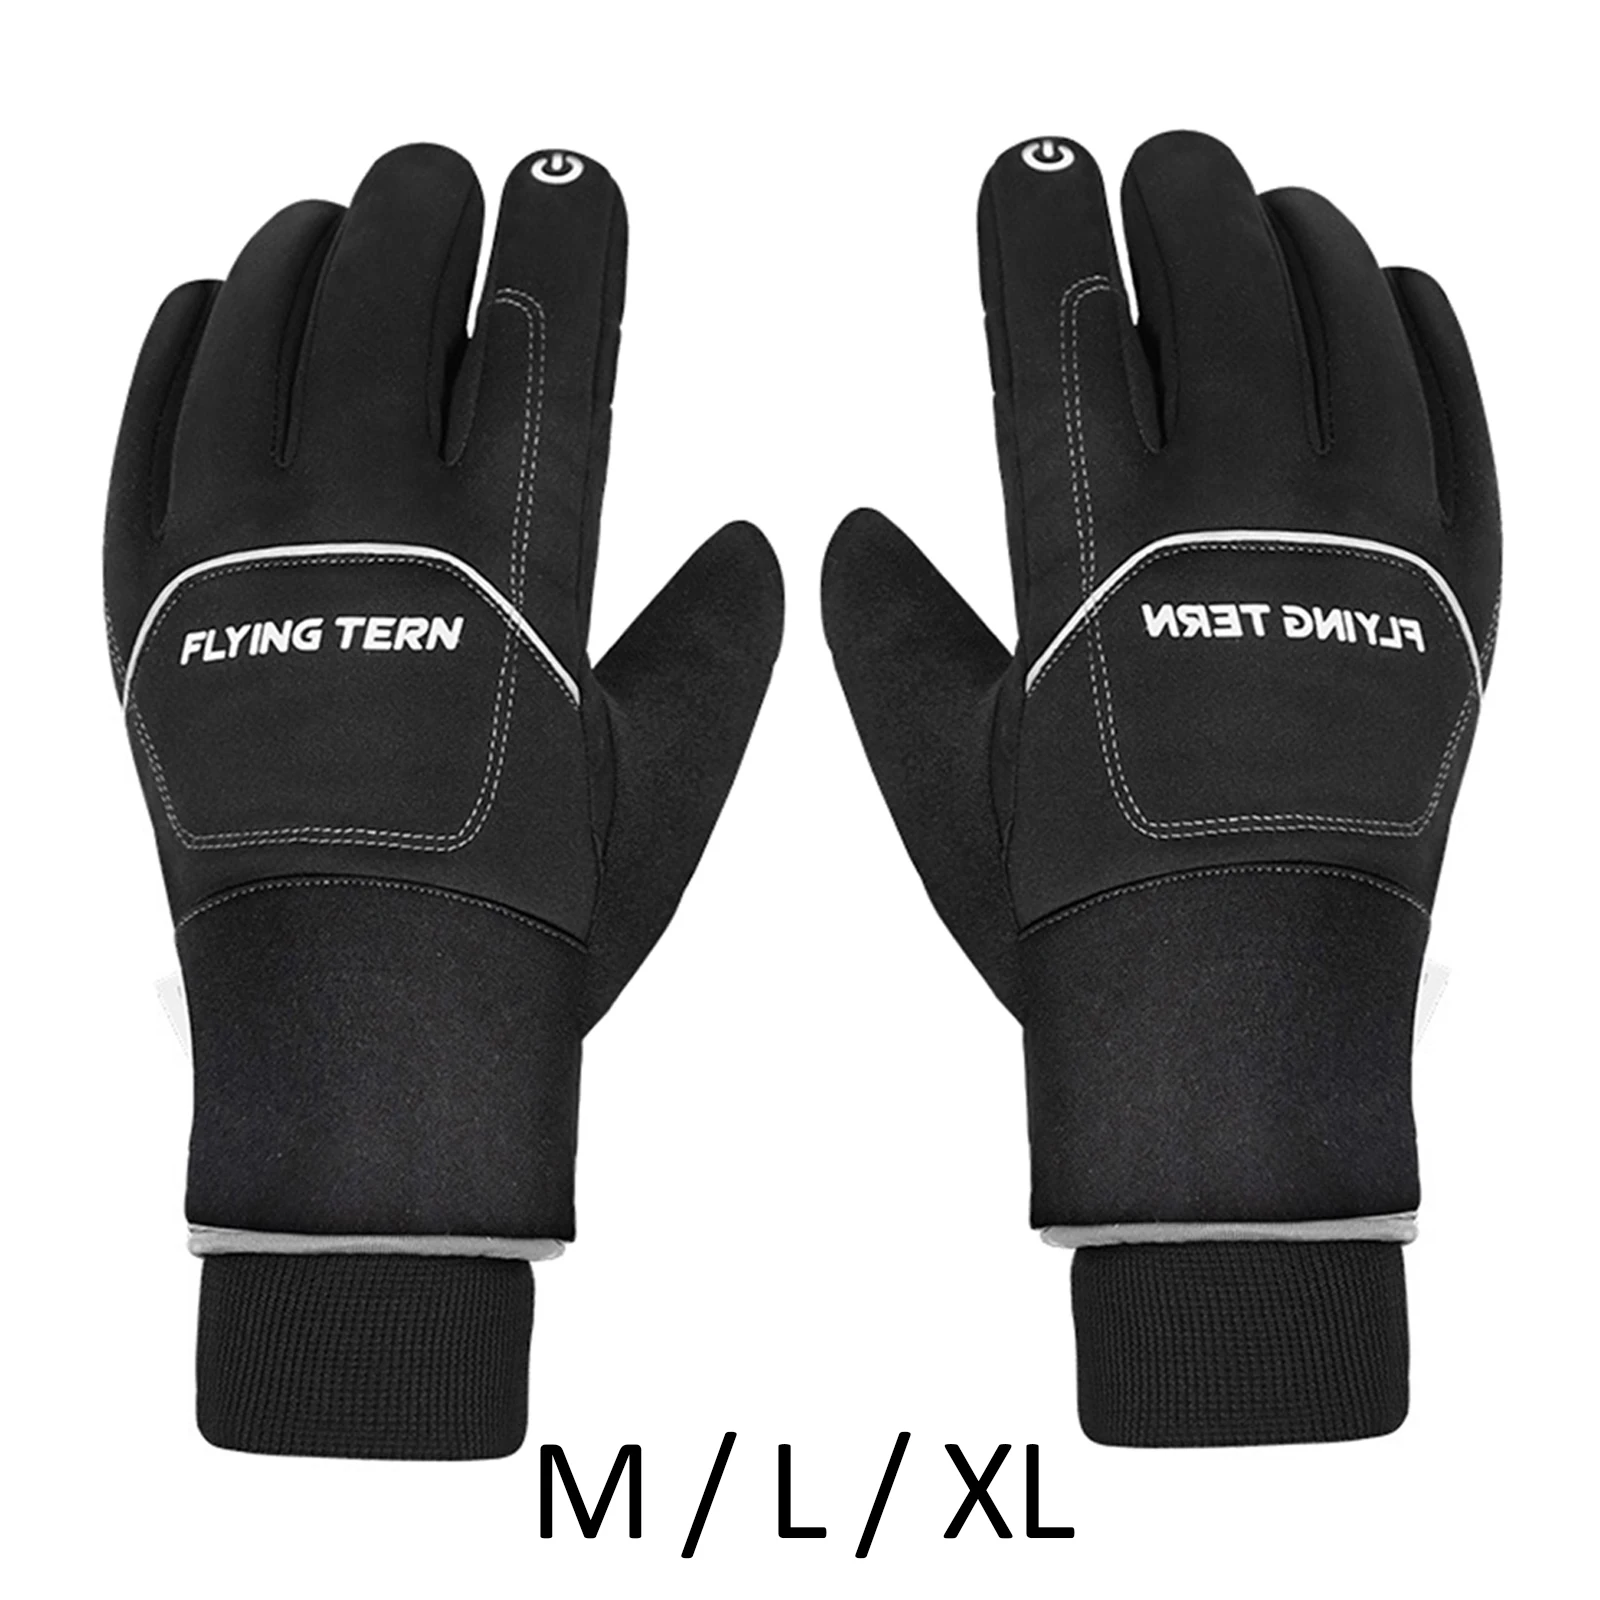 

Motorcycle Gloves Moto Gloves Winter Thermal Fleece Lined Winter Water Resistant Touch Screen Non-slip Motorbike Riding Gloves